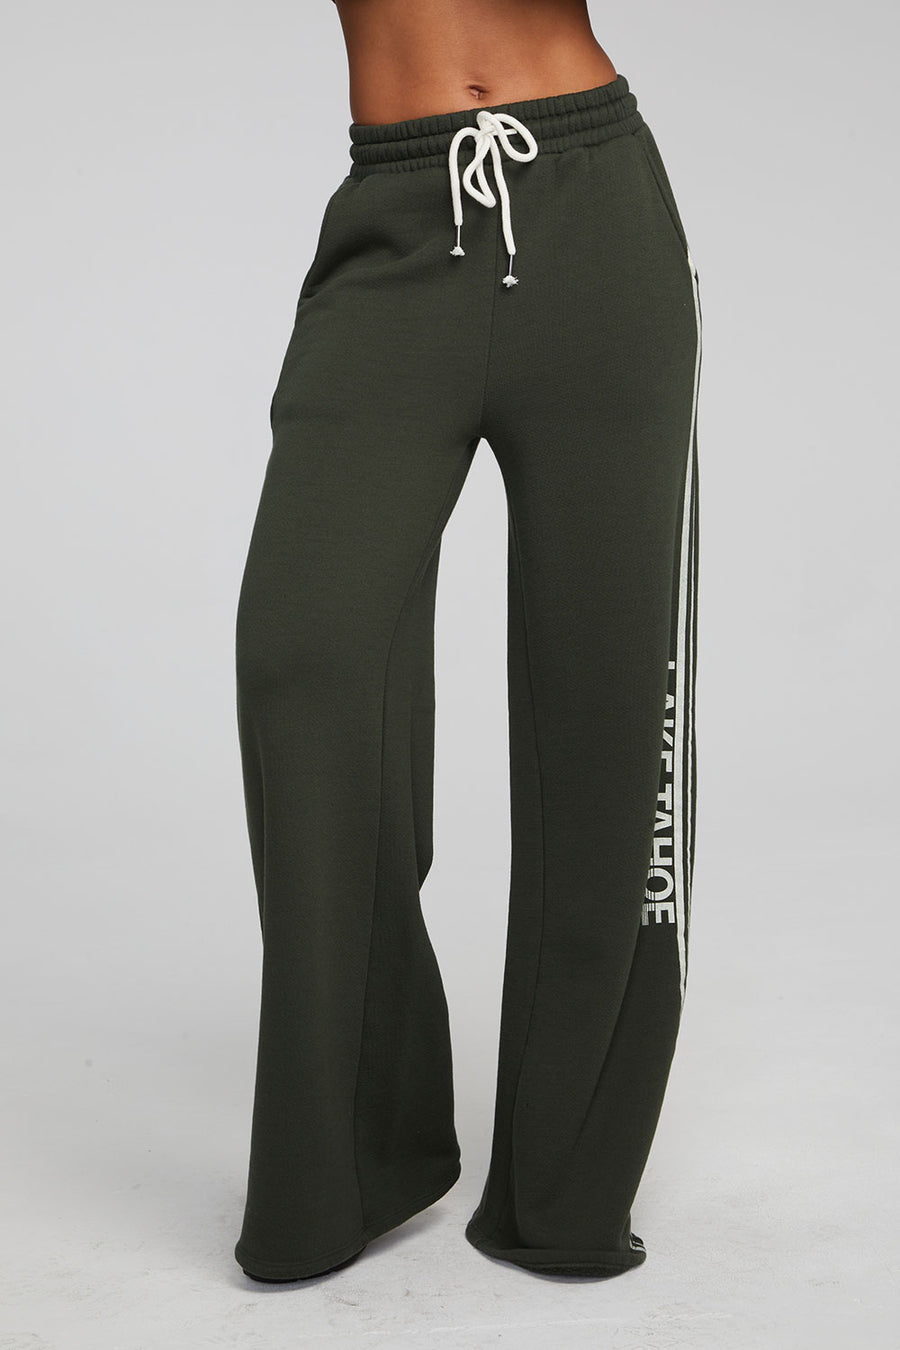 Tahoe Pants WOMENS chaserbrand